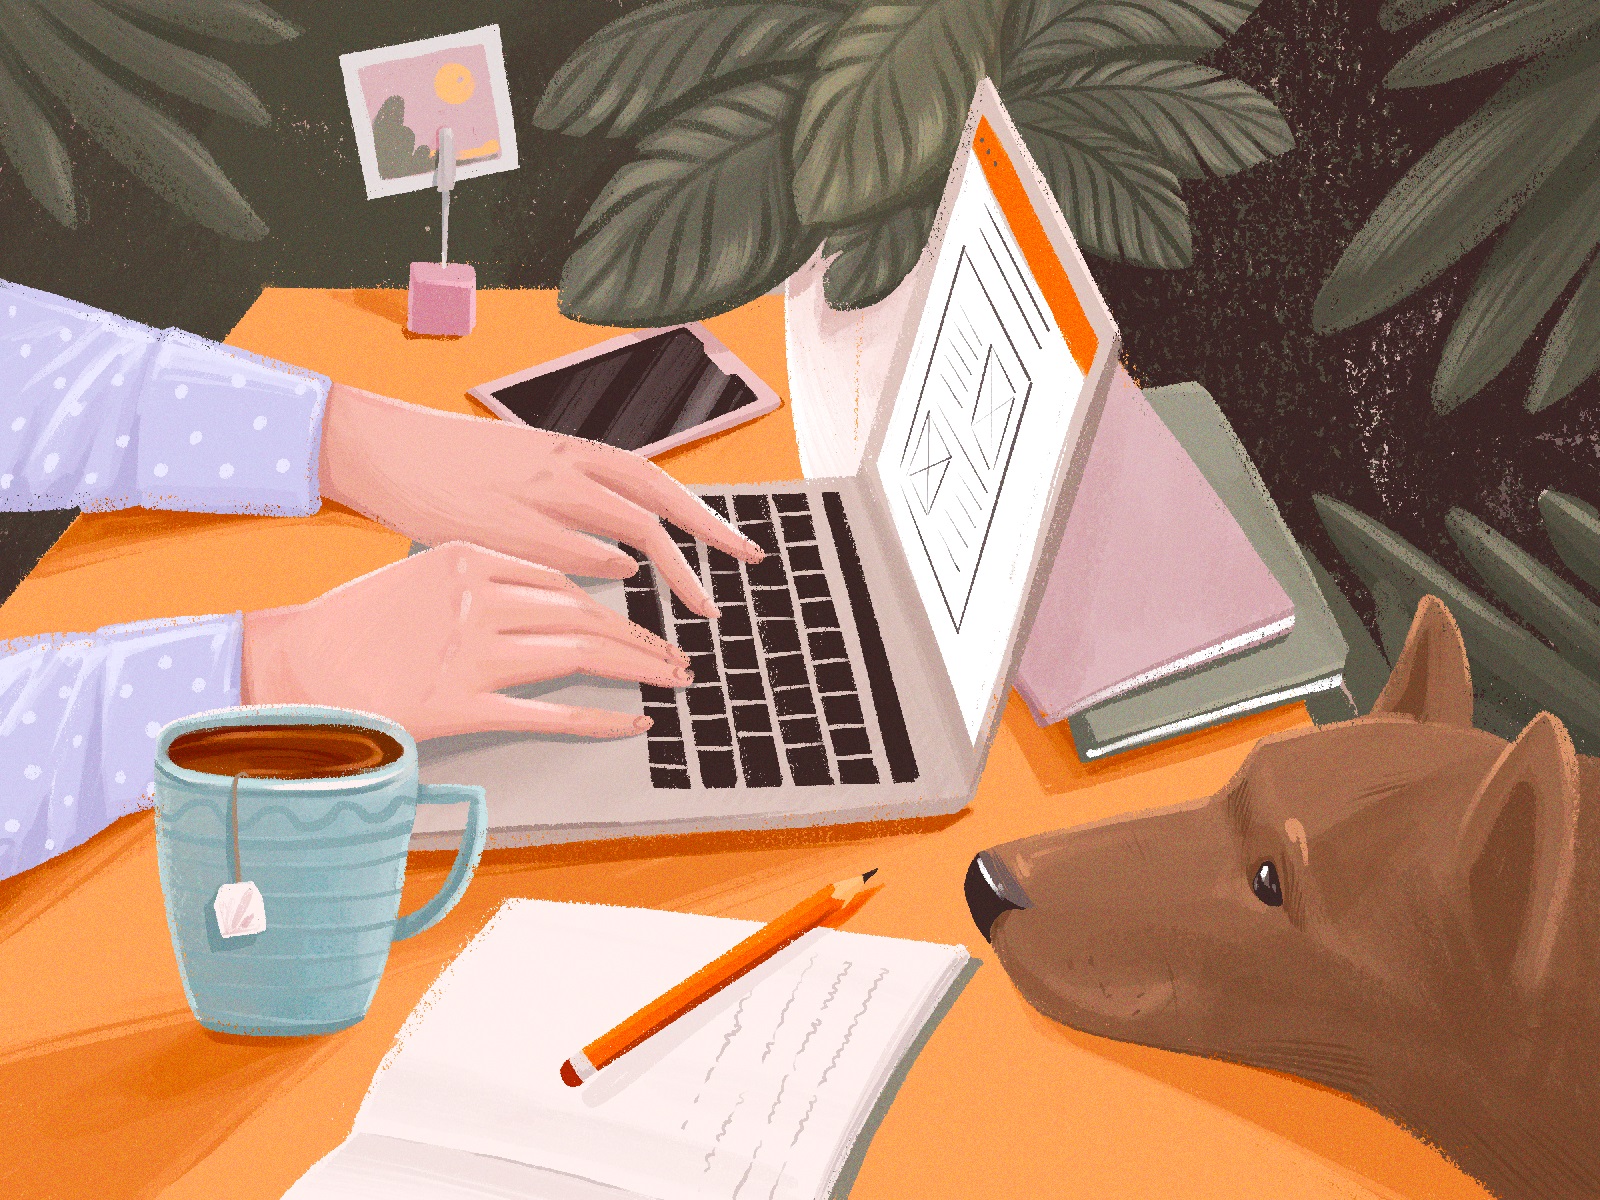 45 Inspiring Illustrations About Workspaces, Creativity and Art